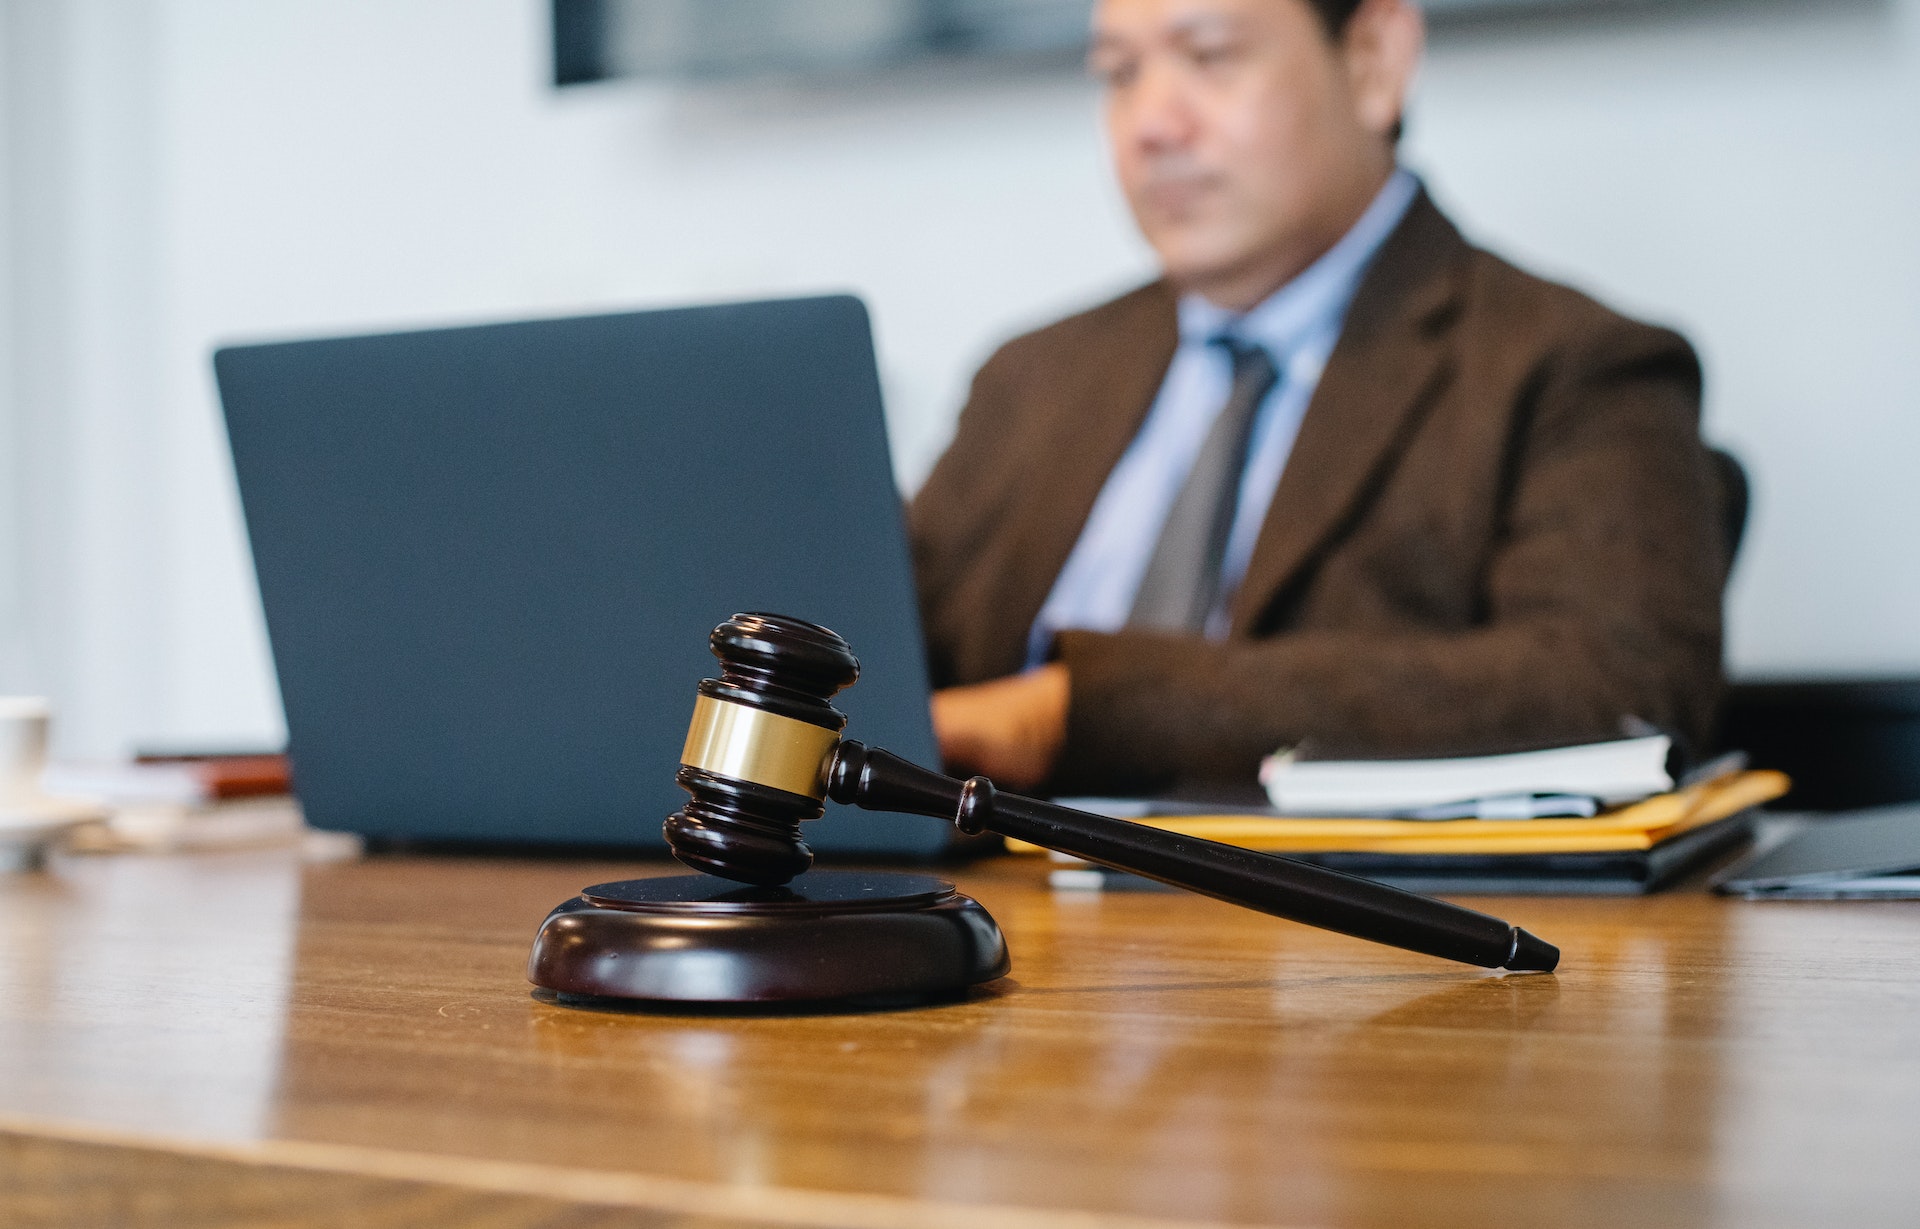 A lawyer sitting in his office | Source: Pexels